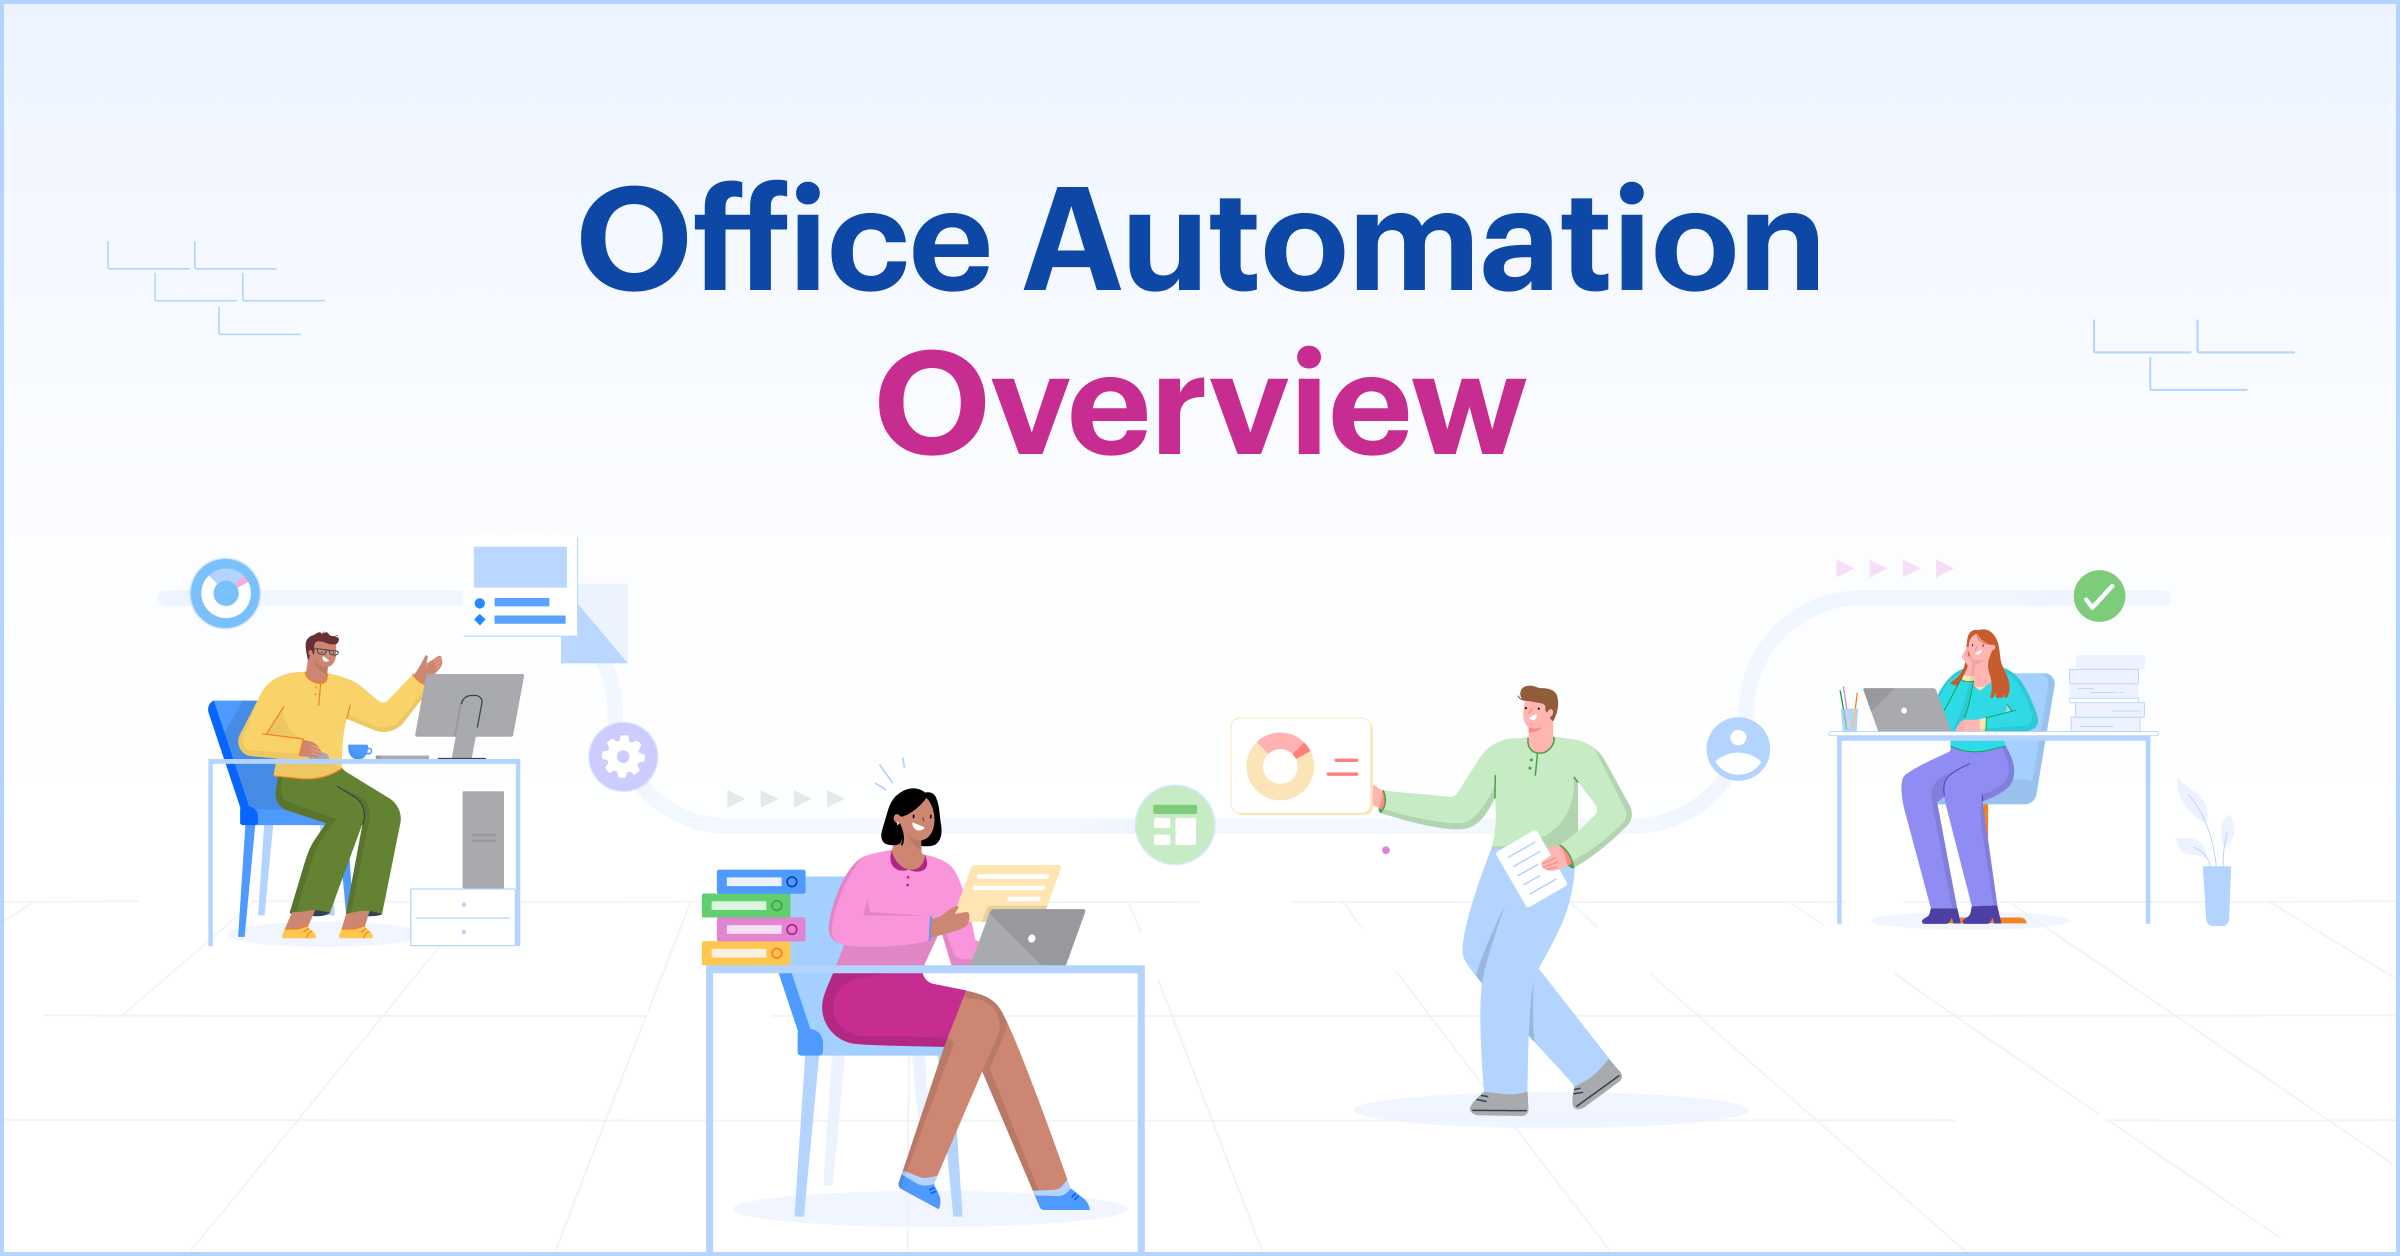 Office Automation Overview